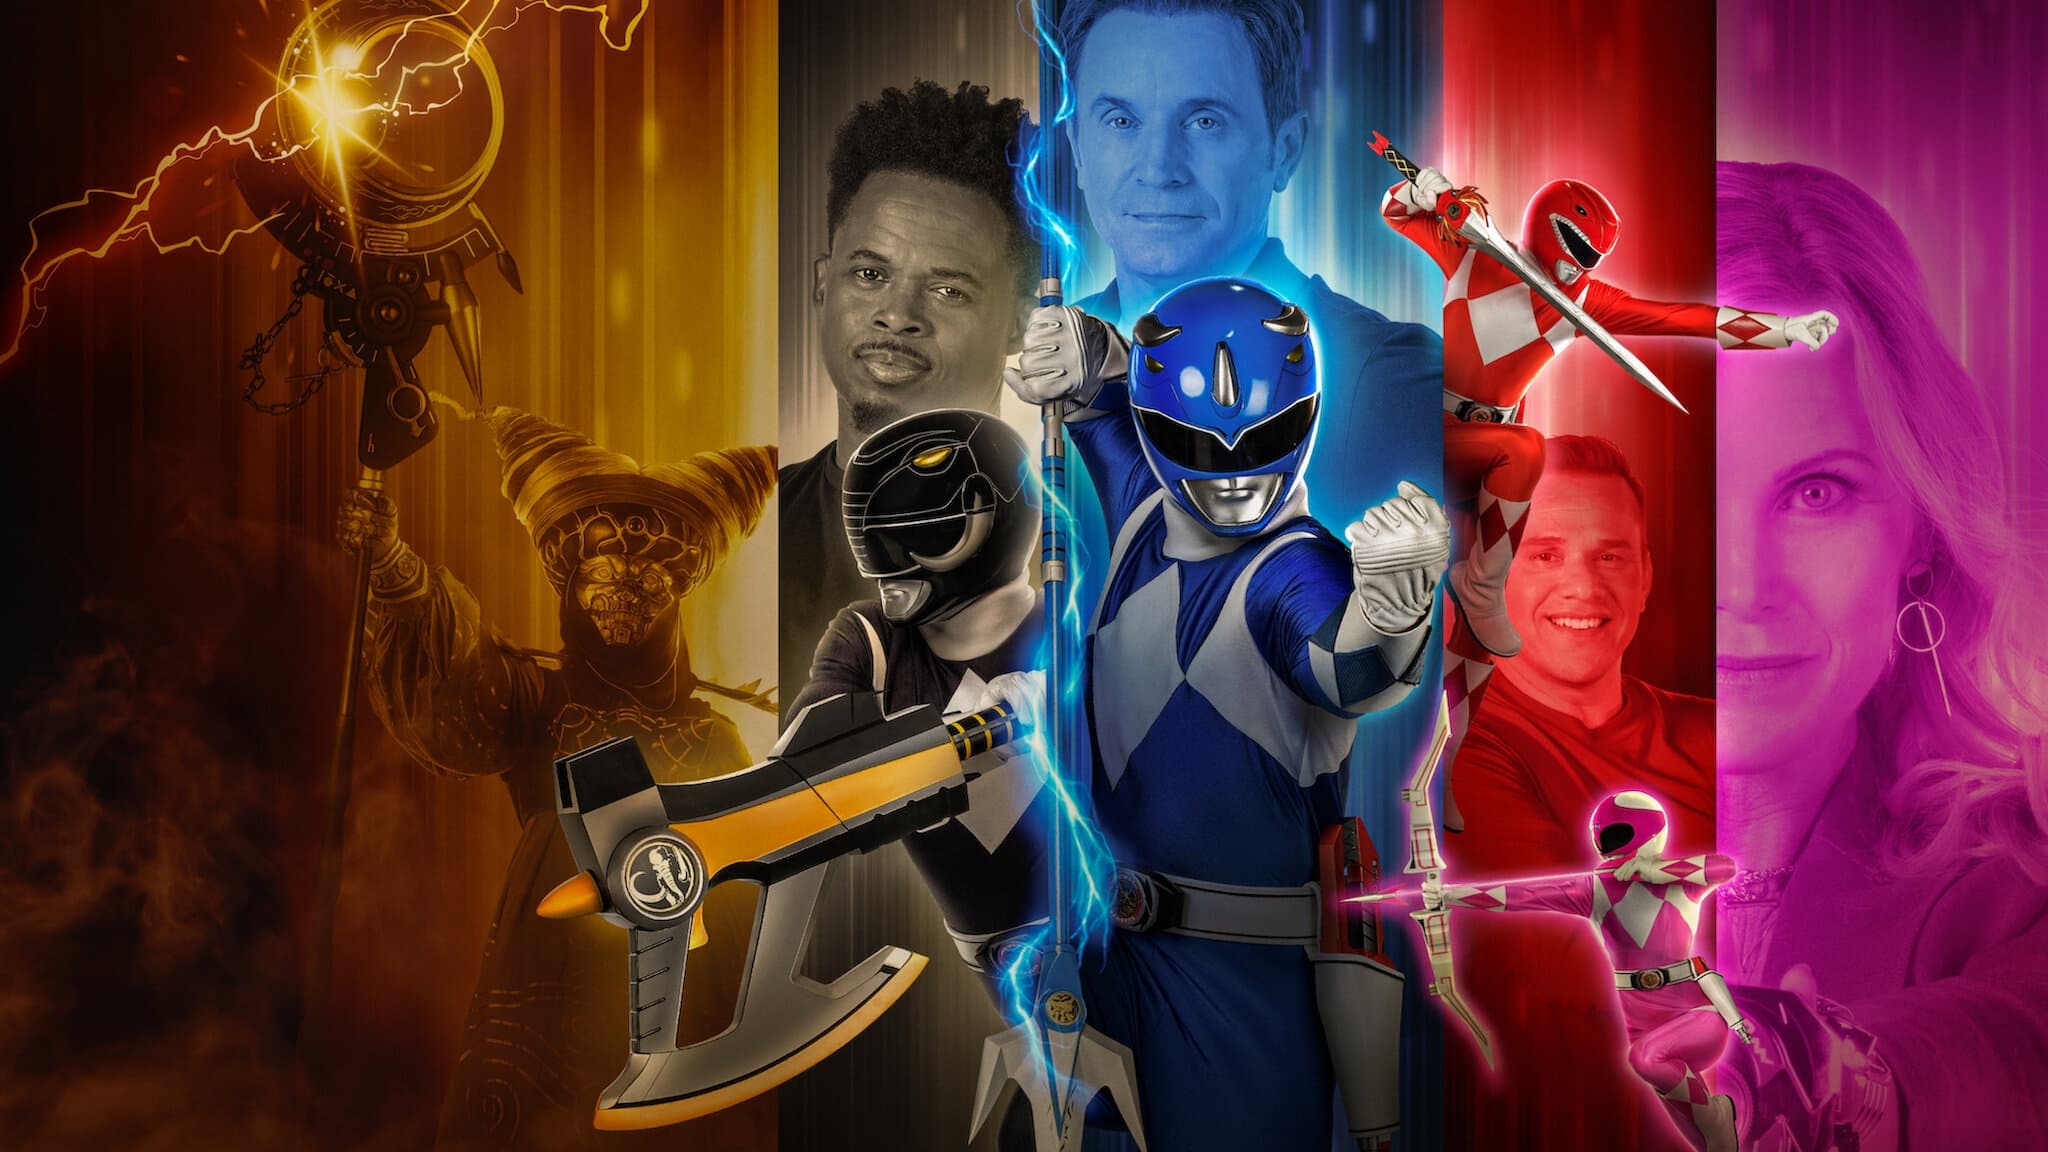 Mighty Morphin Power Rangers: Ayer, hoy y siempre